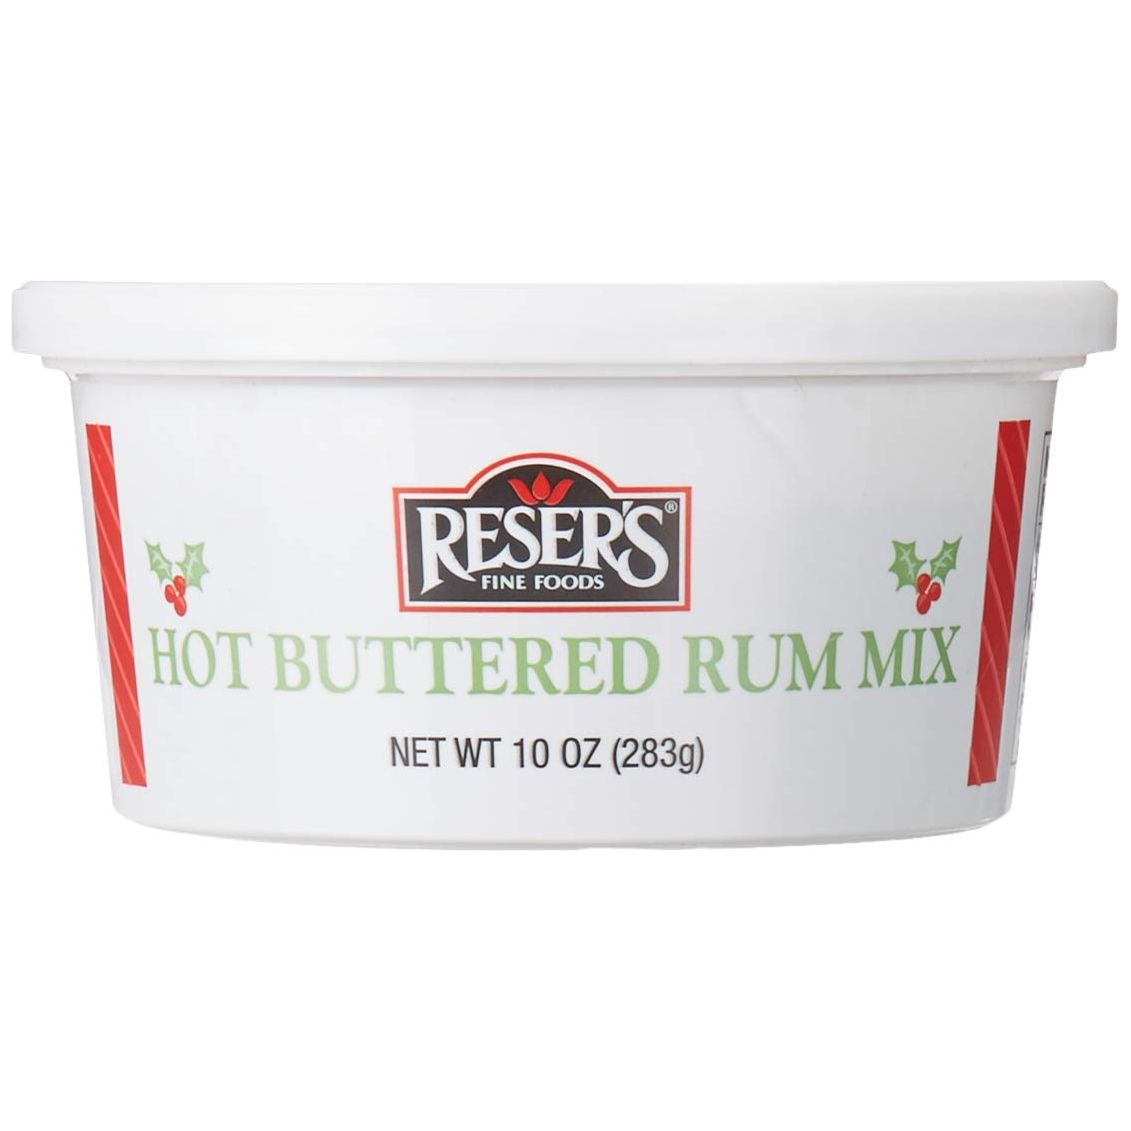 Reser's Hot Buttered Rum Mix 18 ct. Case